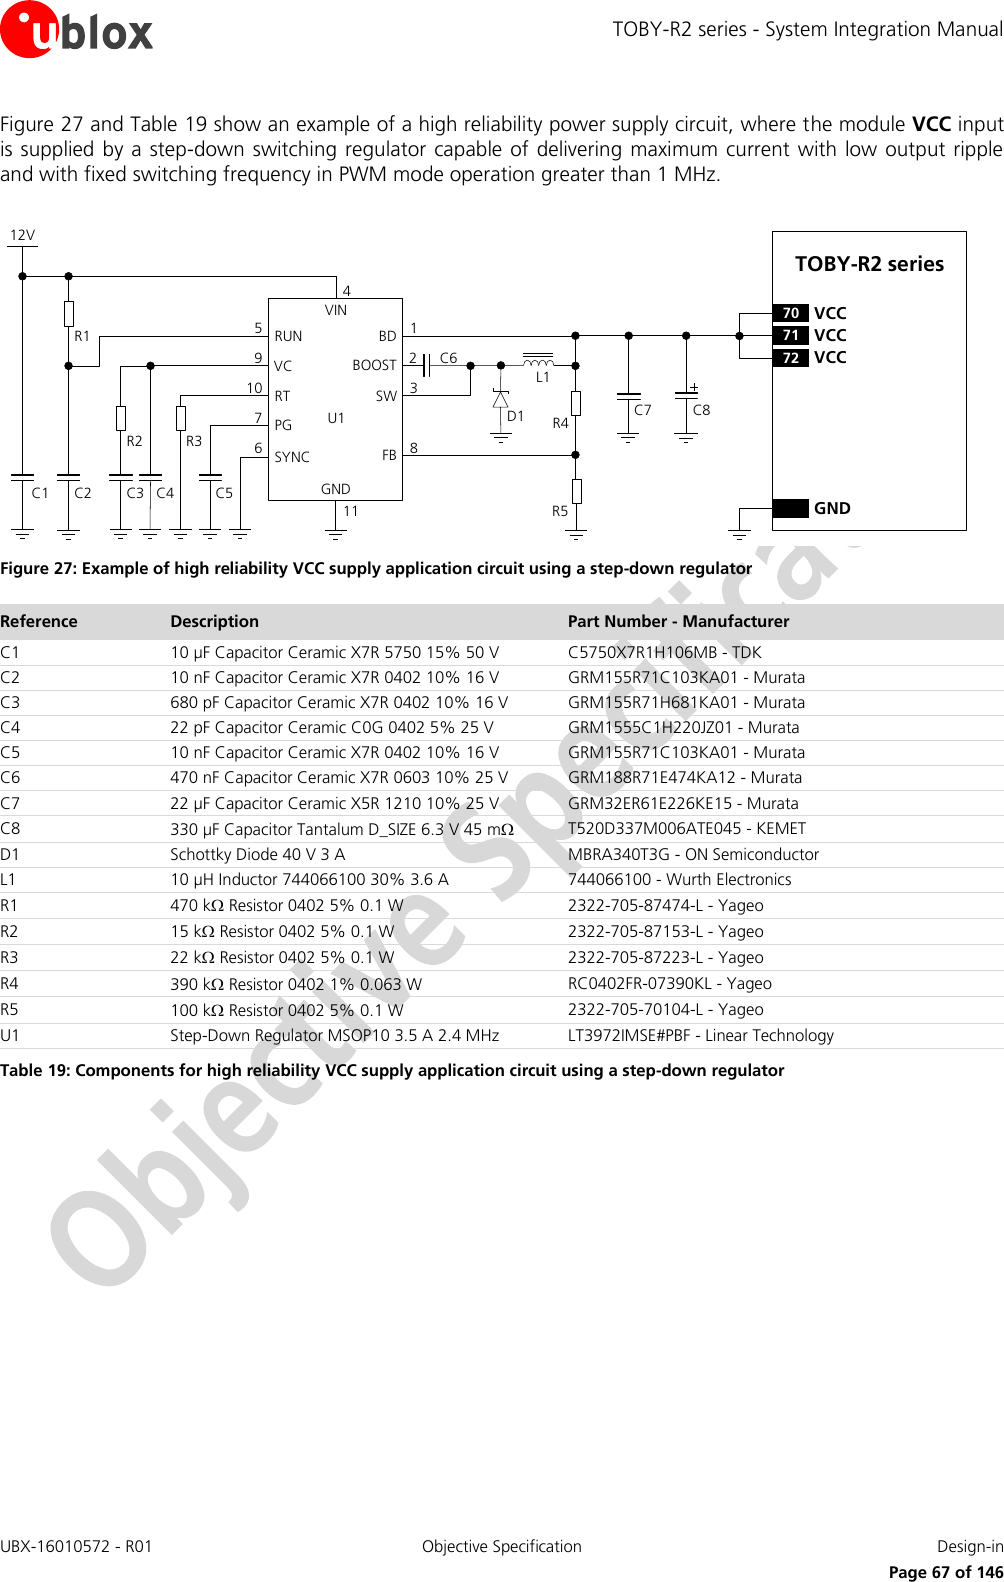 TOBY-R2 series - System Integration Manual UBX-16010572 - R01  Objective Specification  Design-in     Page 67 of 146 Figure 27 and Table 19 show an example of a high reliability power supply circuit, where the module VCC input is supplied  by  a  step-down  switching regulator capable  of  delivering maximum current with low output ripple and with fixed switching frequency in PWM mode operation greater than 1 MHz.  12VC5R3C4R2C2C1R1VINRUNVCRTPGSYNCBDBOOSTSWFBGND671095C61238114C7 C8D1 R4R5L1C3U1TOBY-R2 series71 VCC72 VCC70 VCCGND Figure 27: Example of high reliability VCC supply application circuit using a step-down regulator Reference Description Part Number - Manufacturer C1 10 µF Capacitor Ceramic X7R 5750 15% 50 V C5750X7R1H106MB - TDK C2 10 nF Capacitor Ceramic X7R 0402 10% 16 V GRM155R71C103KA01 - Murata C3 680 pF Capacitor Ceramic X7R 0402 10% 16 V GRM155R71H681KA01 - Murata C4 22 pF Capacitor Ceramic C0G 0402 5% 25 V GRM1555C1H220JZ01 - Murata C5 10 nF Capacitor Ceramic X7R 0402 10% 16 V GRM155R71C103KA01 - Murata C6 470 nF Capacitor Ceramic X7R 0603 10% 25 V GRM188R71E474KA12 - Murata C7 22 µF Capacitor Ceramic X5R 1210 10% 25 V GRM32ER61E226KE15 - Murata C8 330 µF Capacitor Tantalum D_SIZE 6.3 V 45 m T520D337M006ATE045 - KEMET D1 Schottky Diode 40 V 3 A MBRA340T3G - ON Semiconductor L1 10 µH Inductor 744066100 30% 3.6 A 744066100 - Wurth Electronics R1 470 k Resistor 0402 5% 0.1 W 2322-705-87474-L - Yageo R2 15 k Resistor 0402 5% 0.1 W 2322-705-87153-L - Yageo R3 22 k Resistor 0402 5% 0.1 W 2322-705-87223-L - Yageo R4 390 k Resistor 0402 1% 0.063 W RC0402FR-07390KL - Yageo R5 100 k Resistor 0402 5% 0.1 W 2322-705-70104-L - Yageo U1 Step-Down Regulator MSOP10 3.5 A 2.4 MHz LT3972IMSE#PBF - Linear Technology Table 19: Components for high reliability VCC supply application circuit using a step-down regulator 